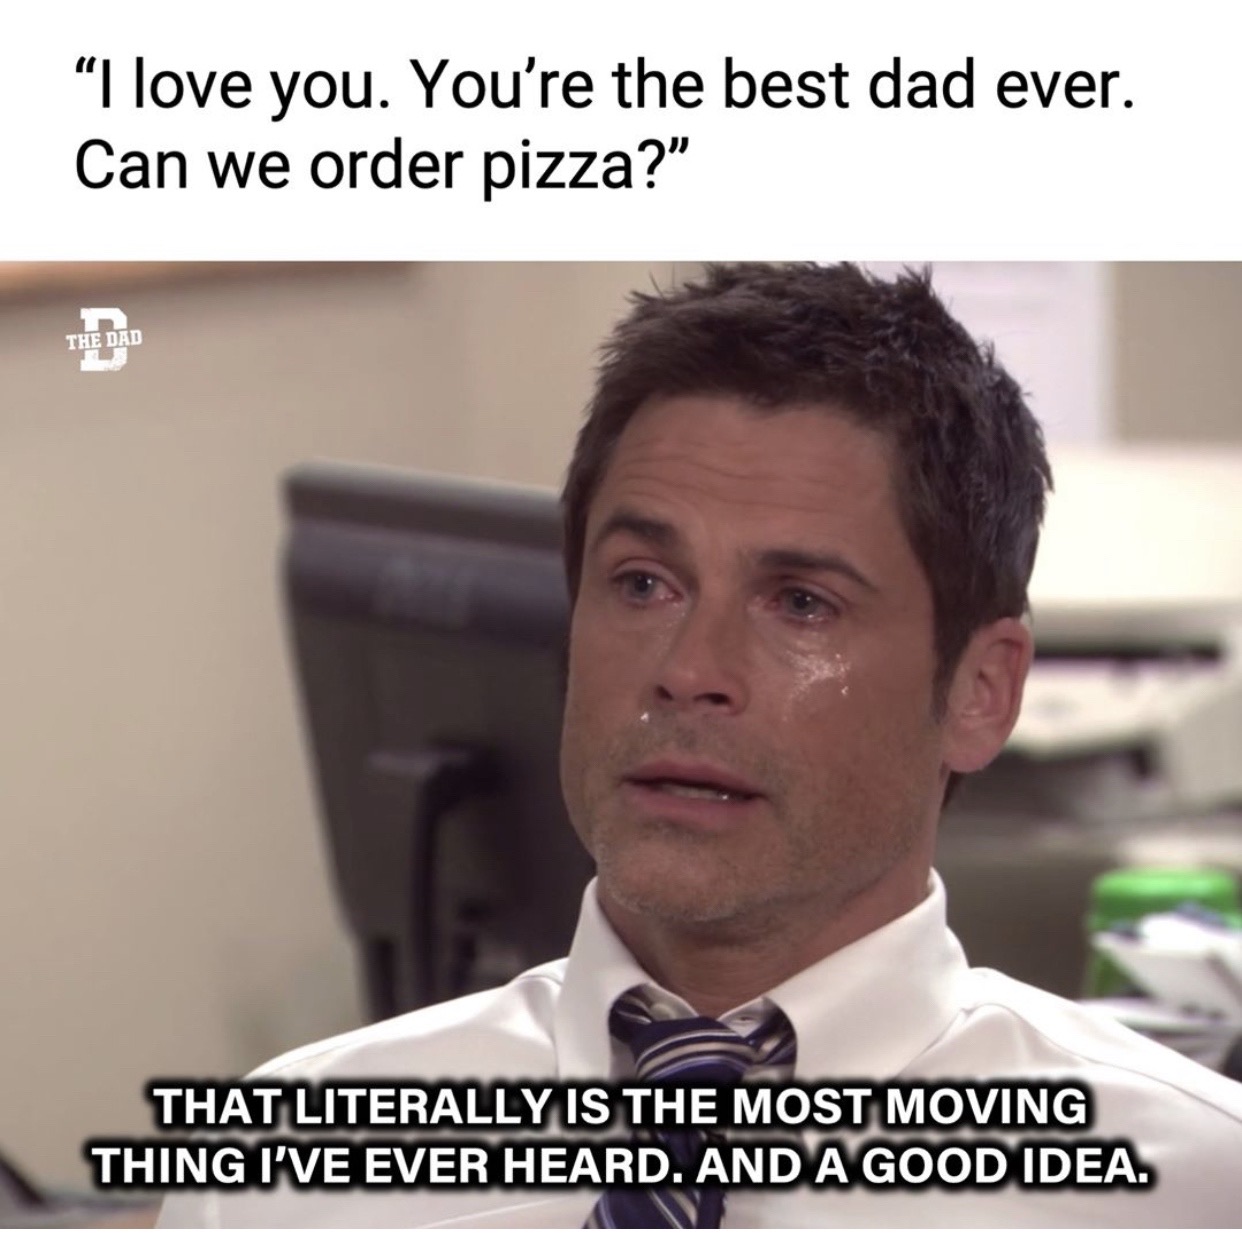 photo caption - I love you. You're the best dad ever. Can we order pizza?" The Dad That Literally Is The Most Moving Thing I'Ve Ever Heard. And A Good Idea.